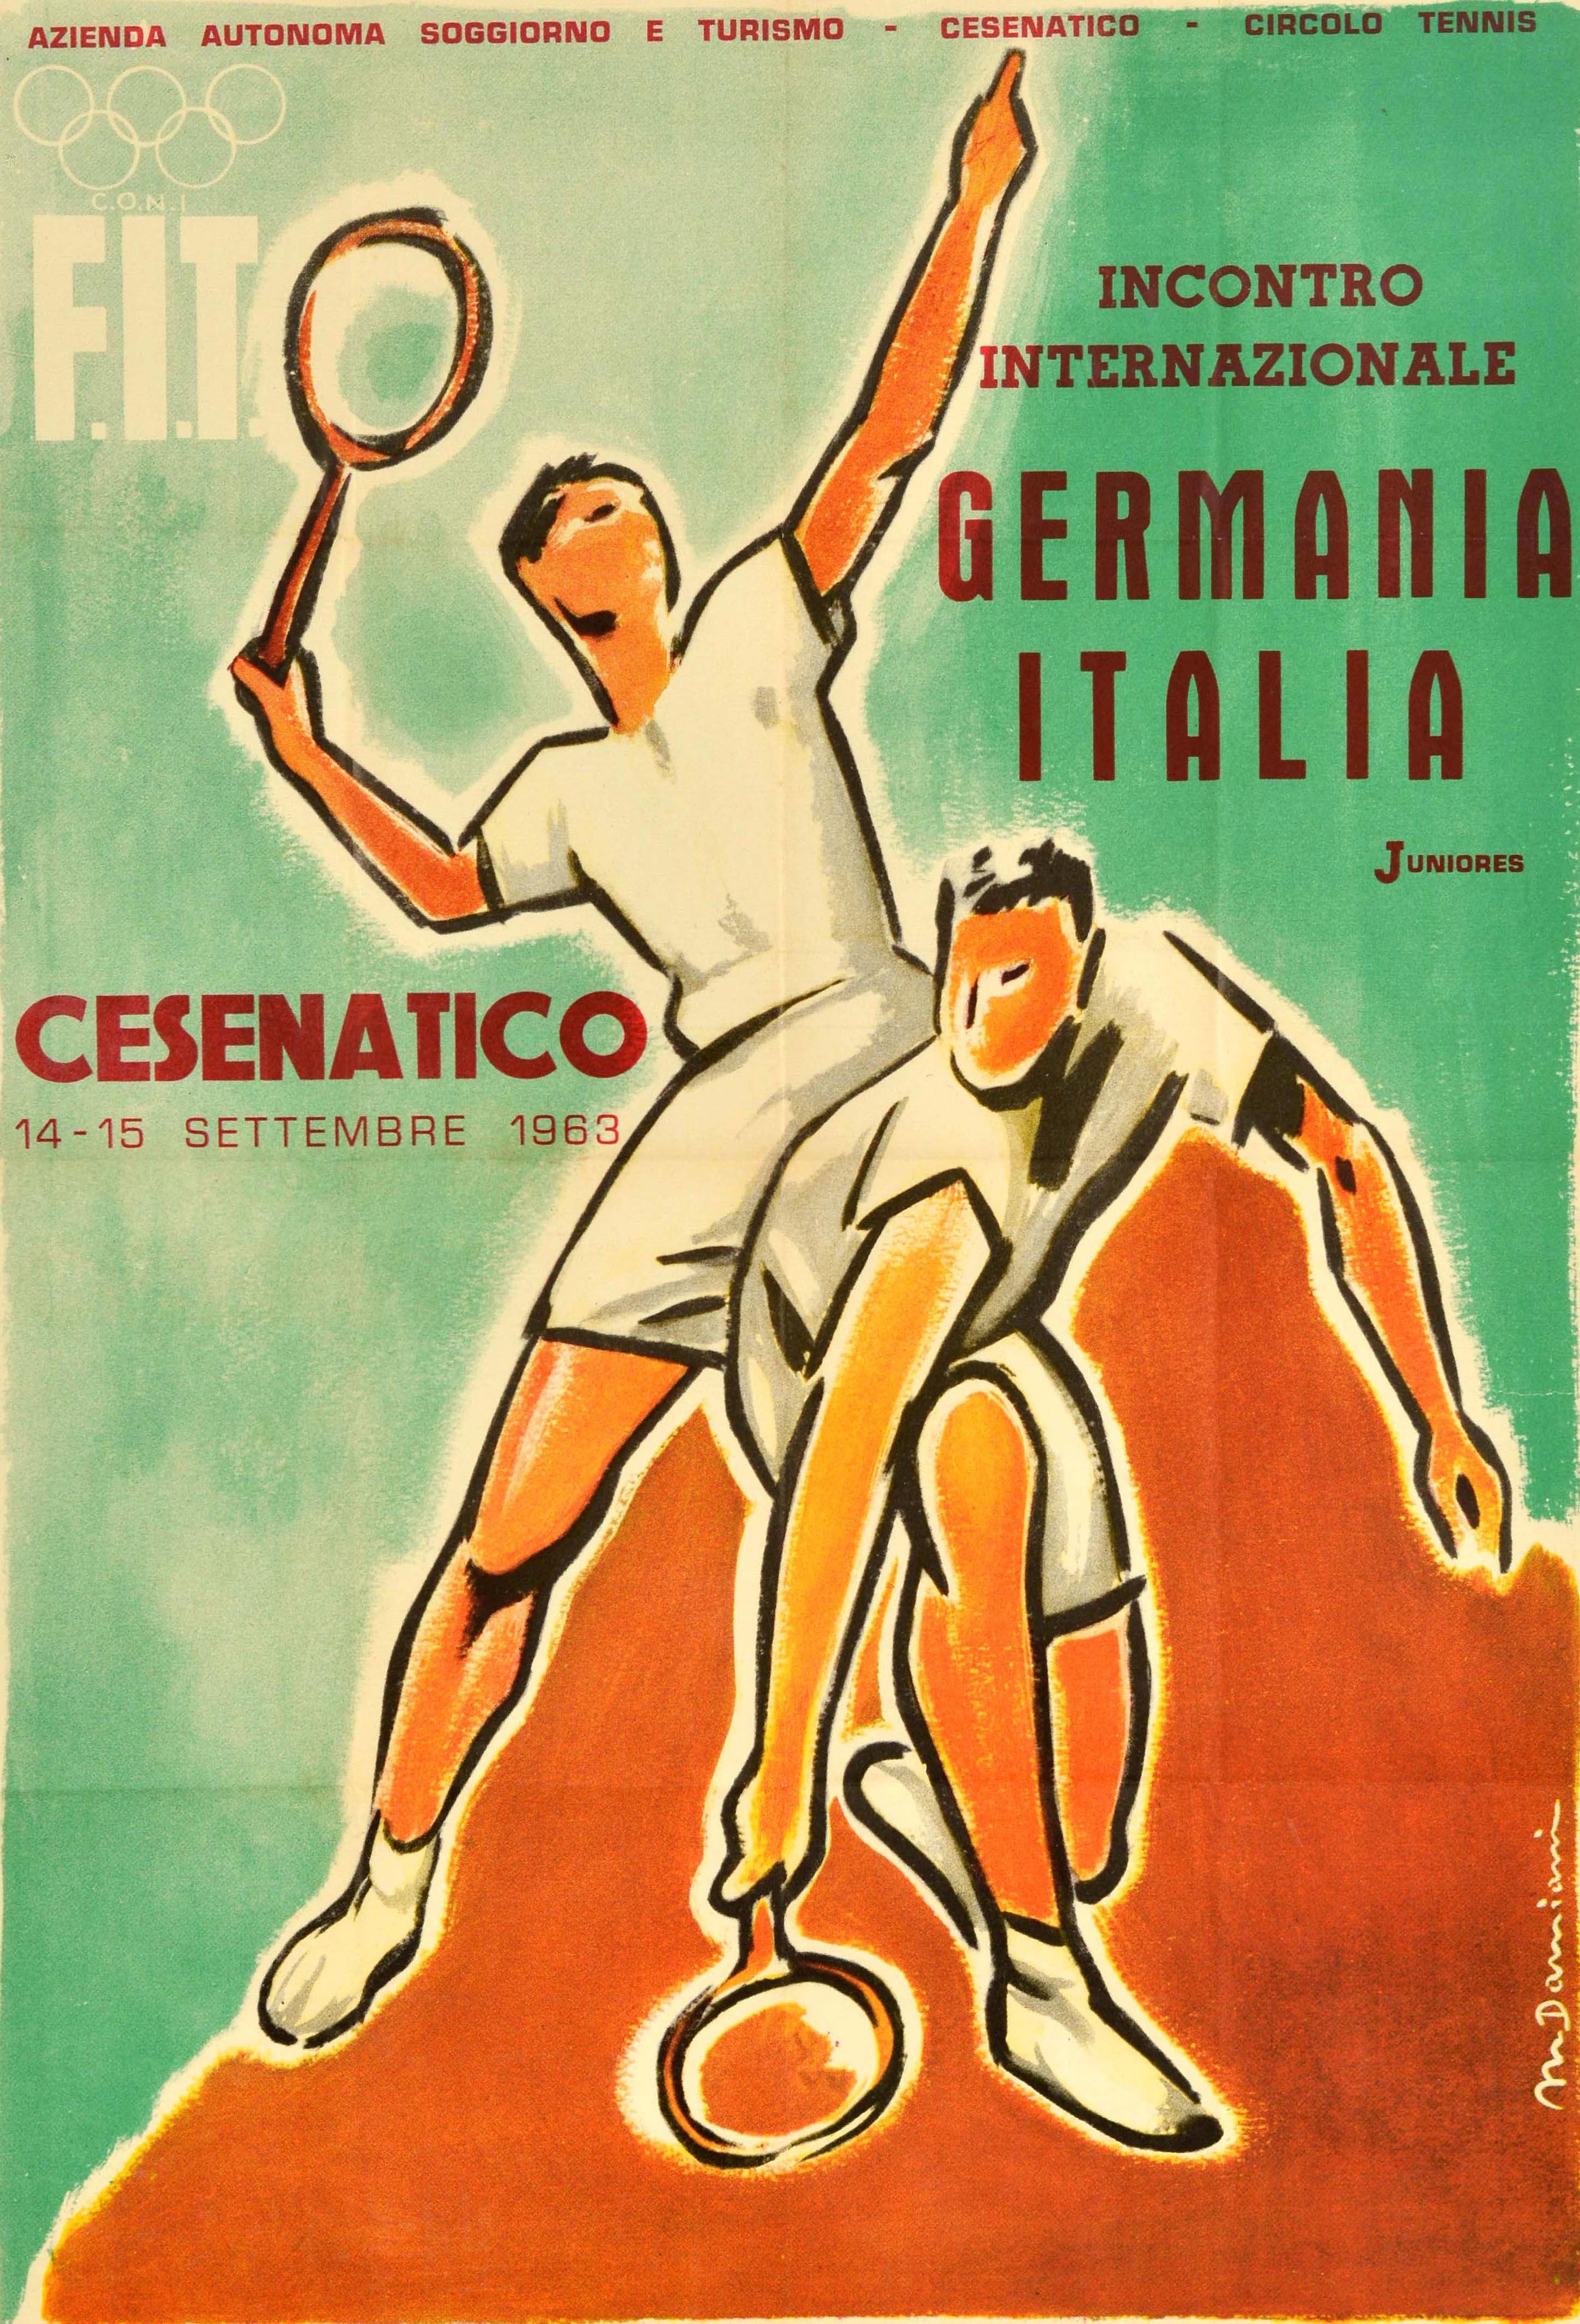 Original vintage sport poster for the International Meeting Germany Italy Juniors / Incontro Internazionale Germania Italia Juniores in Cesenatico from 14-15 September 1963 featuring great artwork depicting two tennis players in action holding